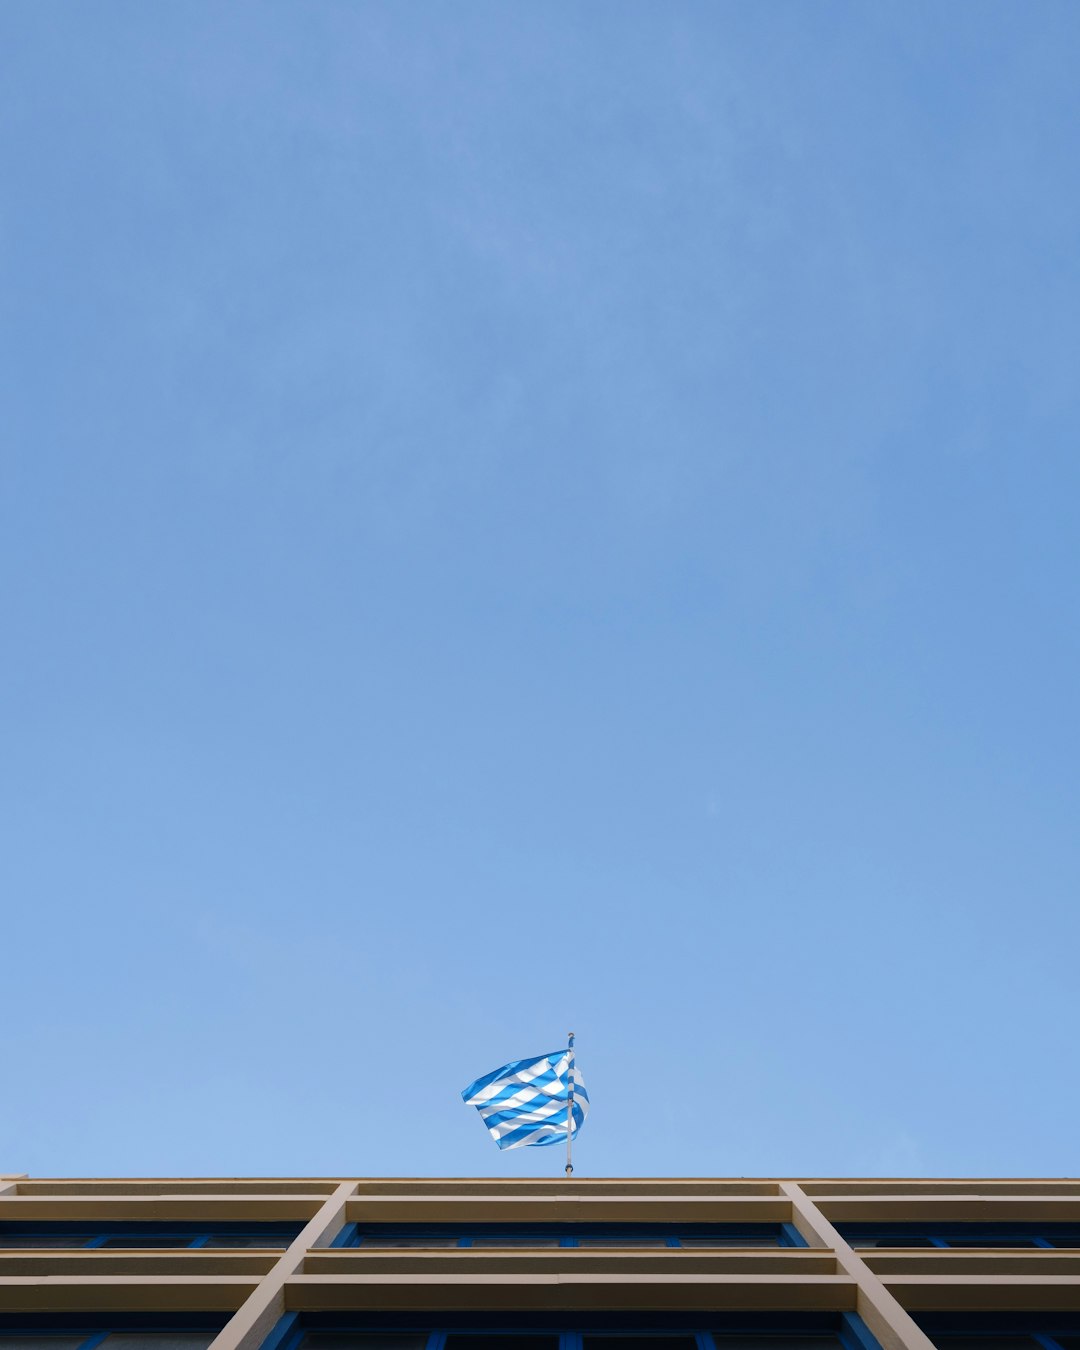 blue and white striped flag on pole under blue sky during daytime